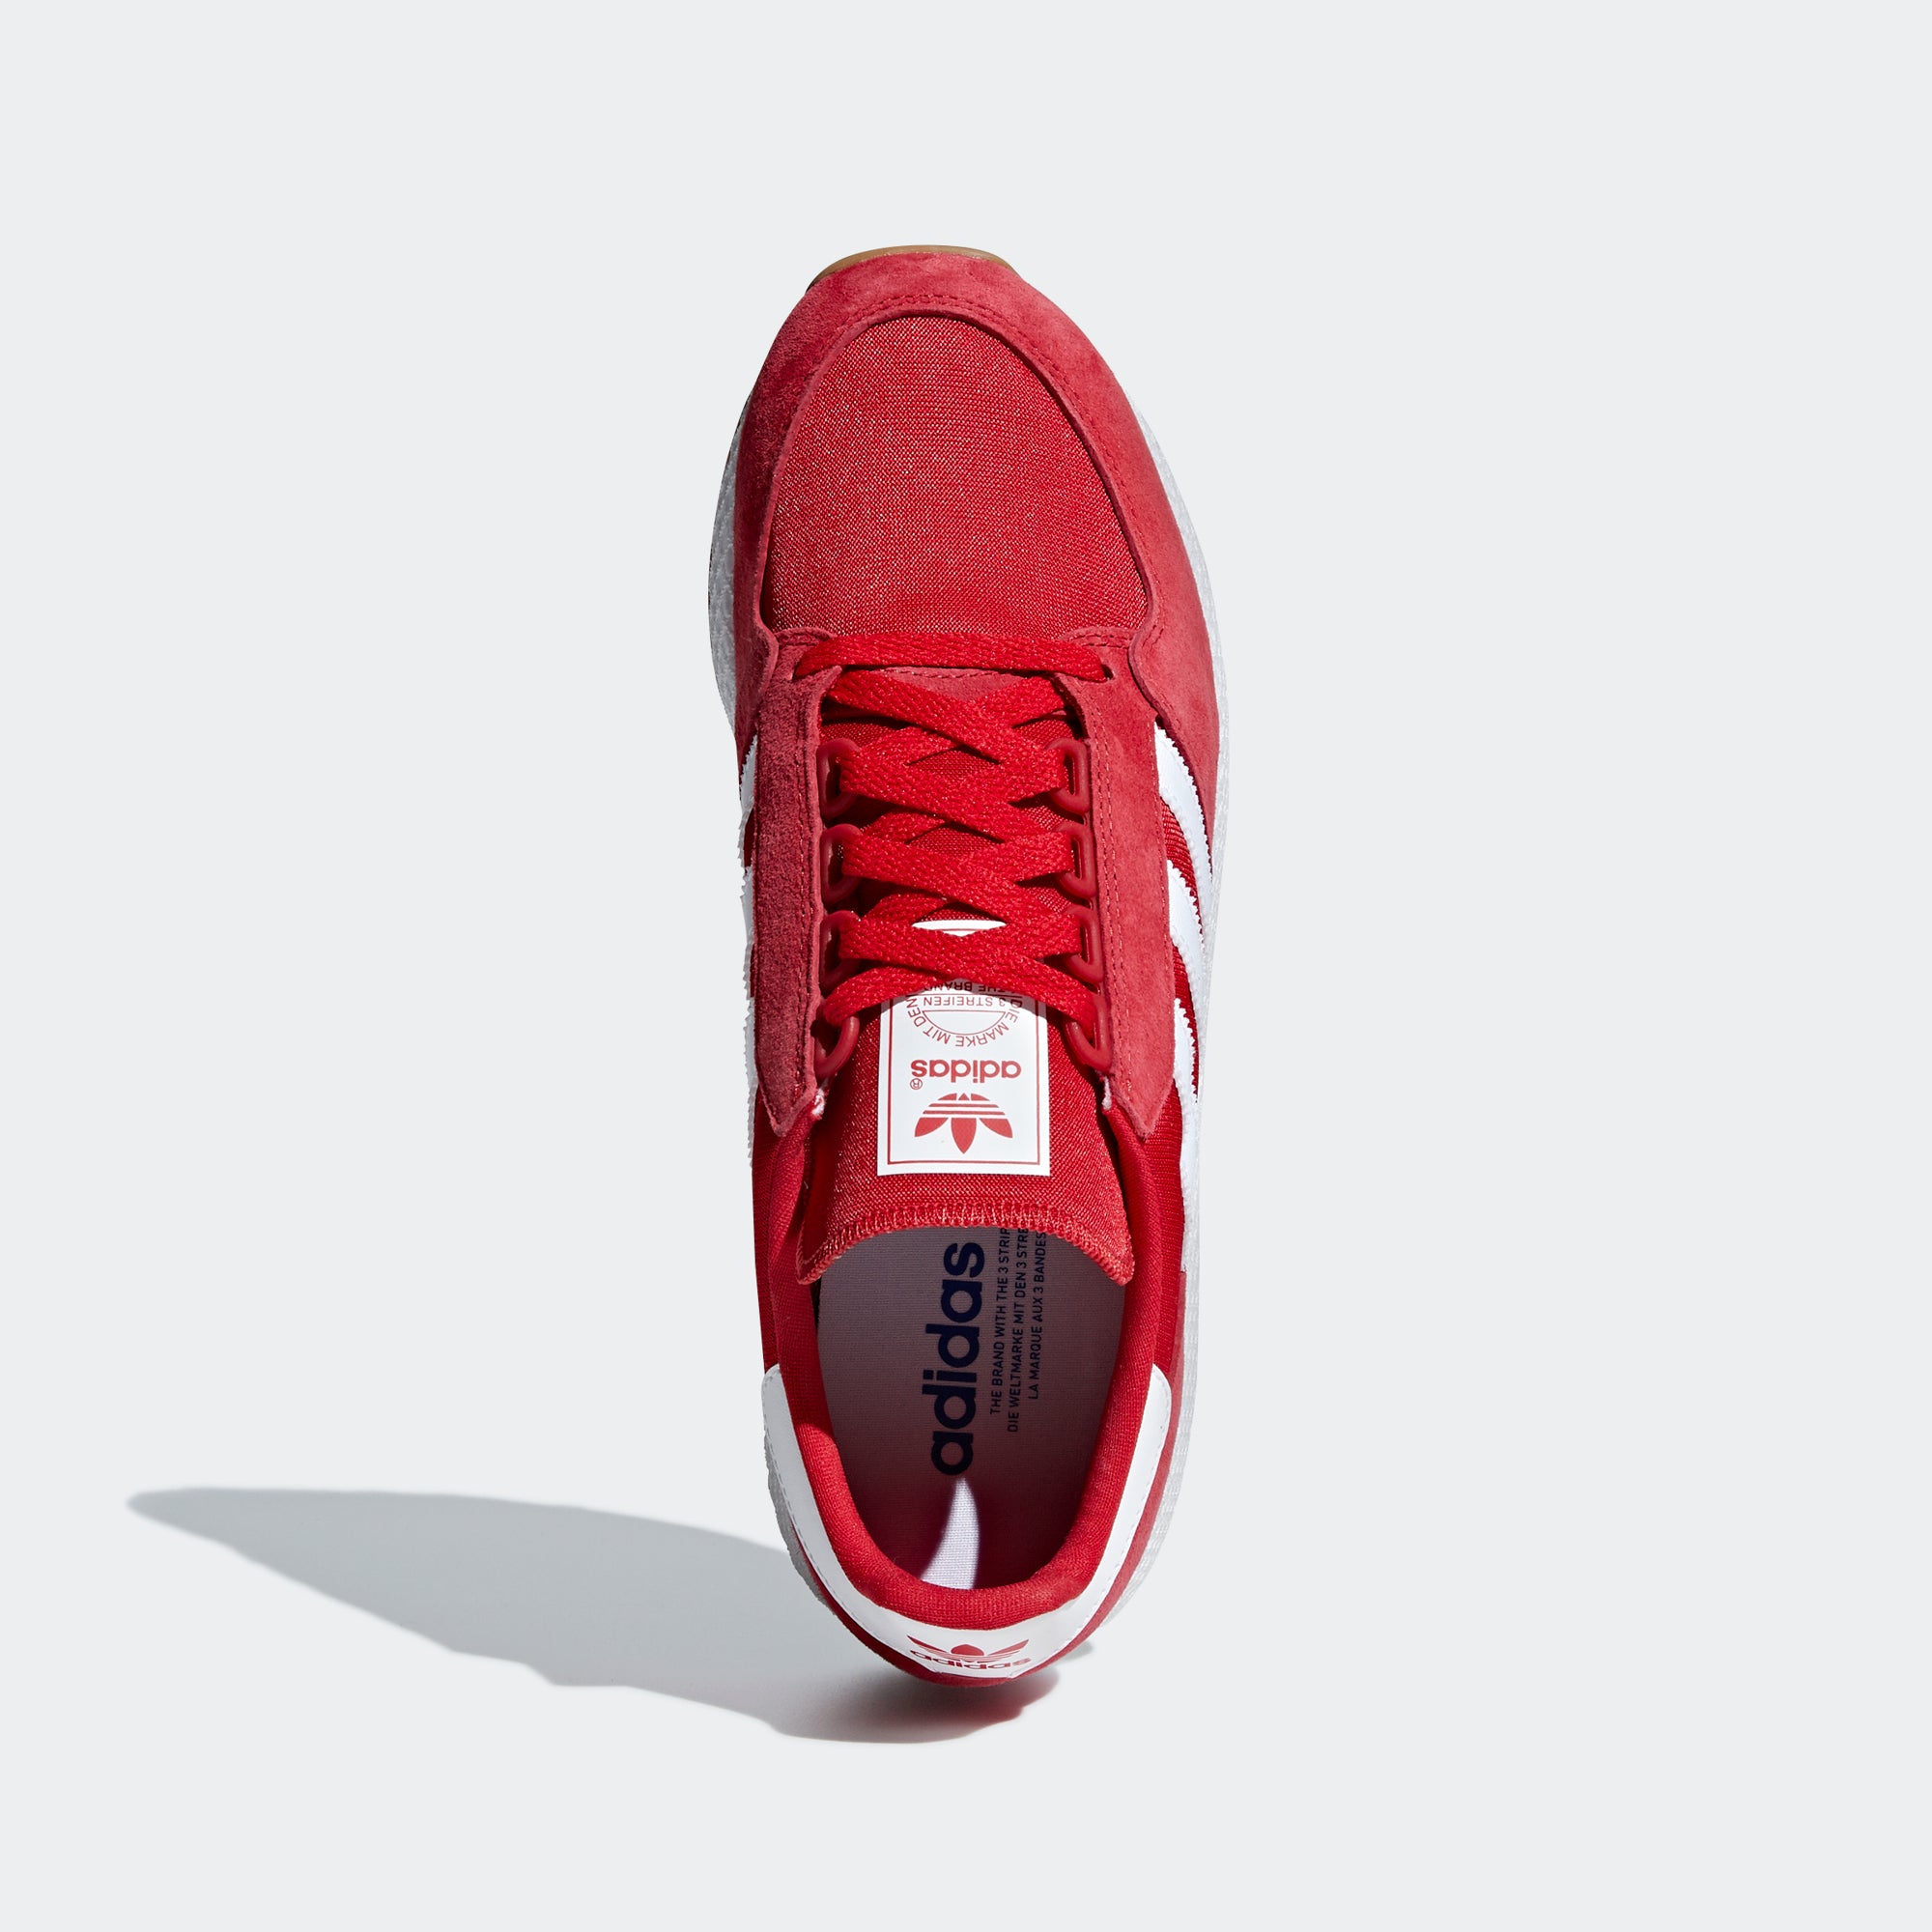 adidas forest grove scarlet